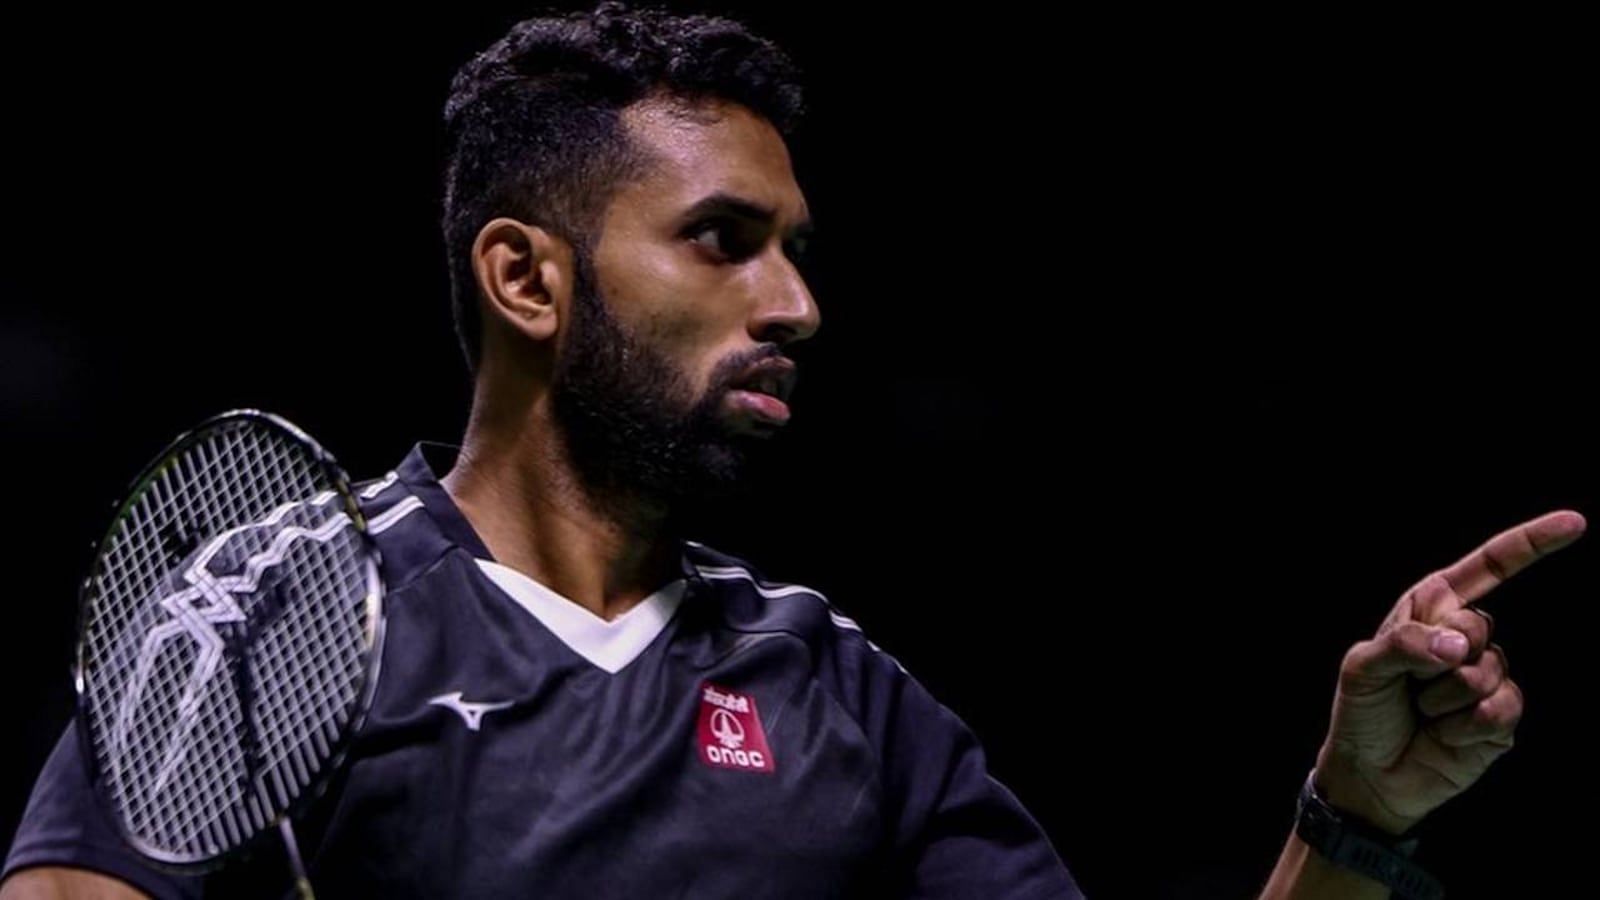 HS Prannoy said that he is back to training after his back injury 